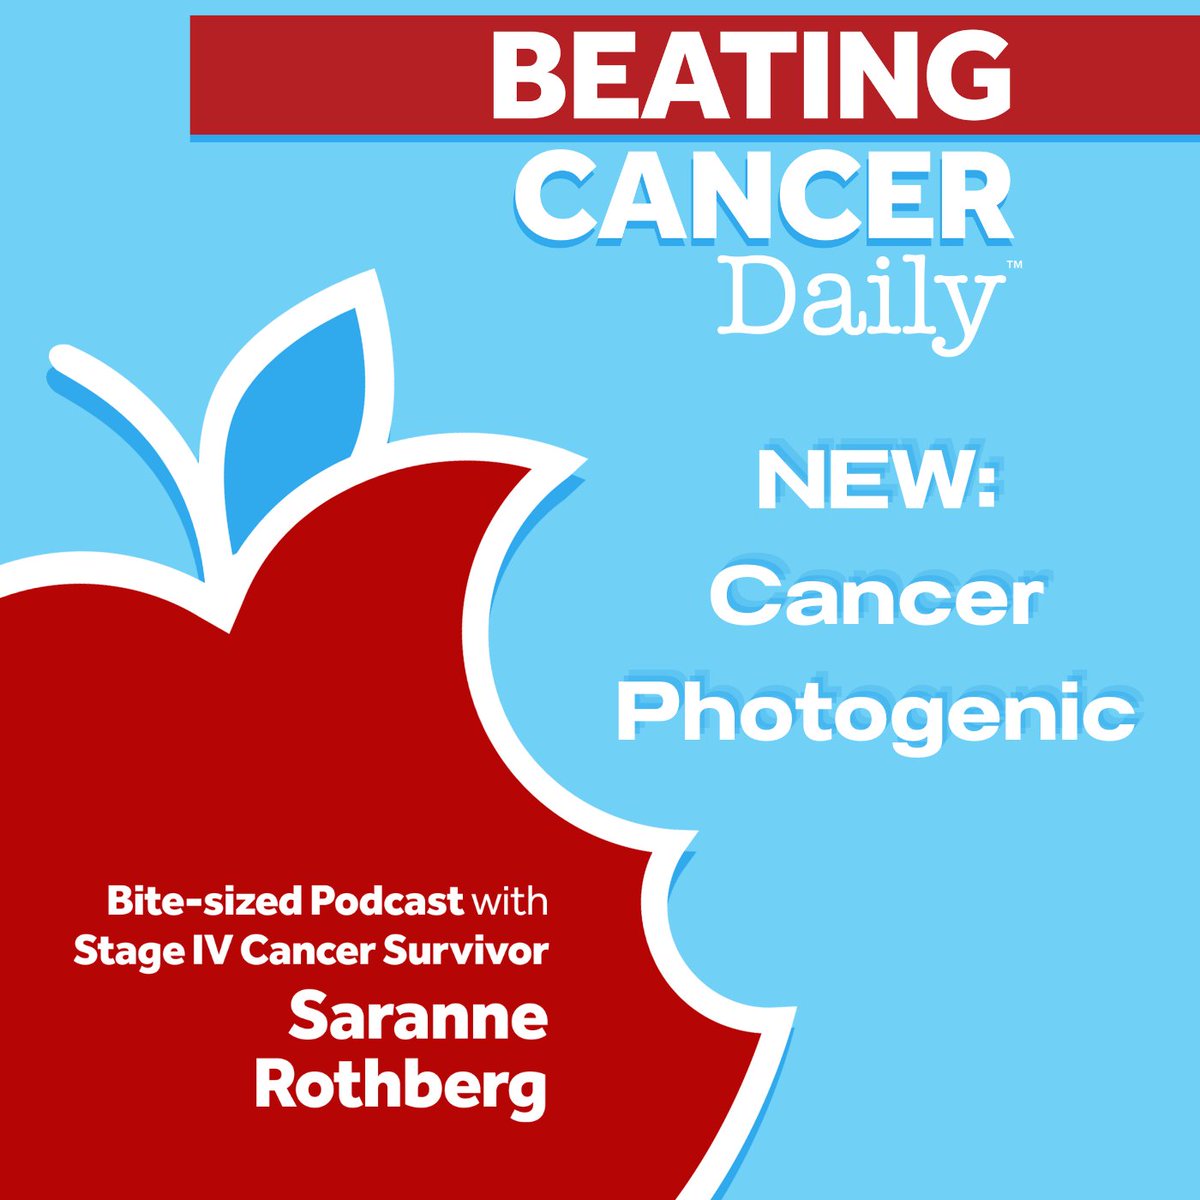 Today on #BeatingCancerDaily, Fan Favorite: Cancer Photogenic
Listen wherever you listen to podcasts. 
ComedyCures.org

#ComedyCures #LaughDaily #InstaLaugh #laughtherapy #NonProfit #nonprofitlife #standupcomedian #survivor #remission #cancersurvivor #cancertreatment